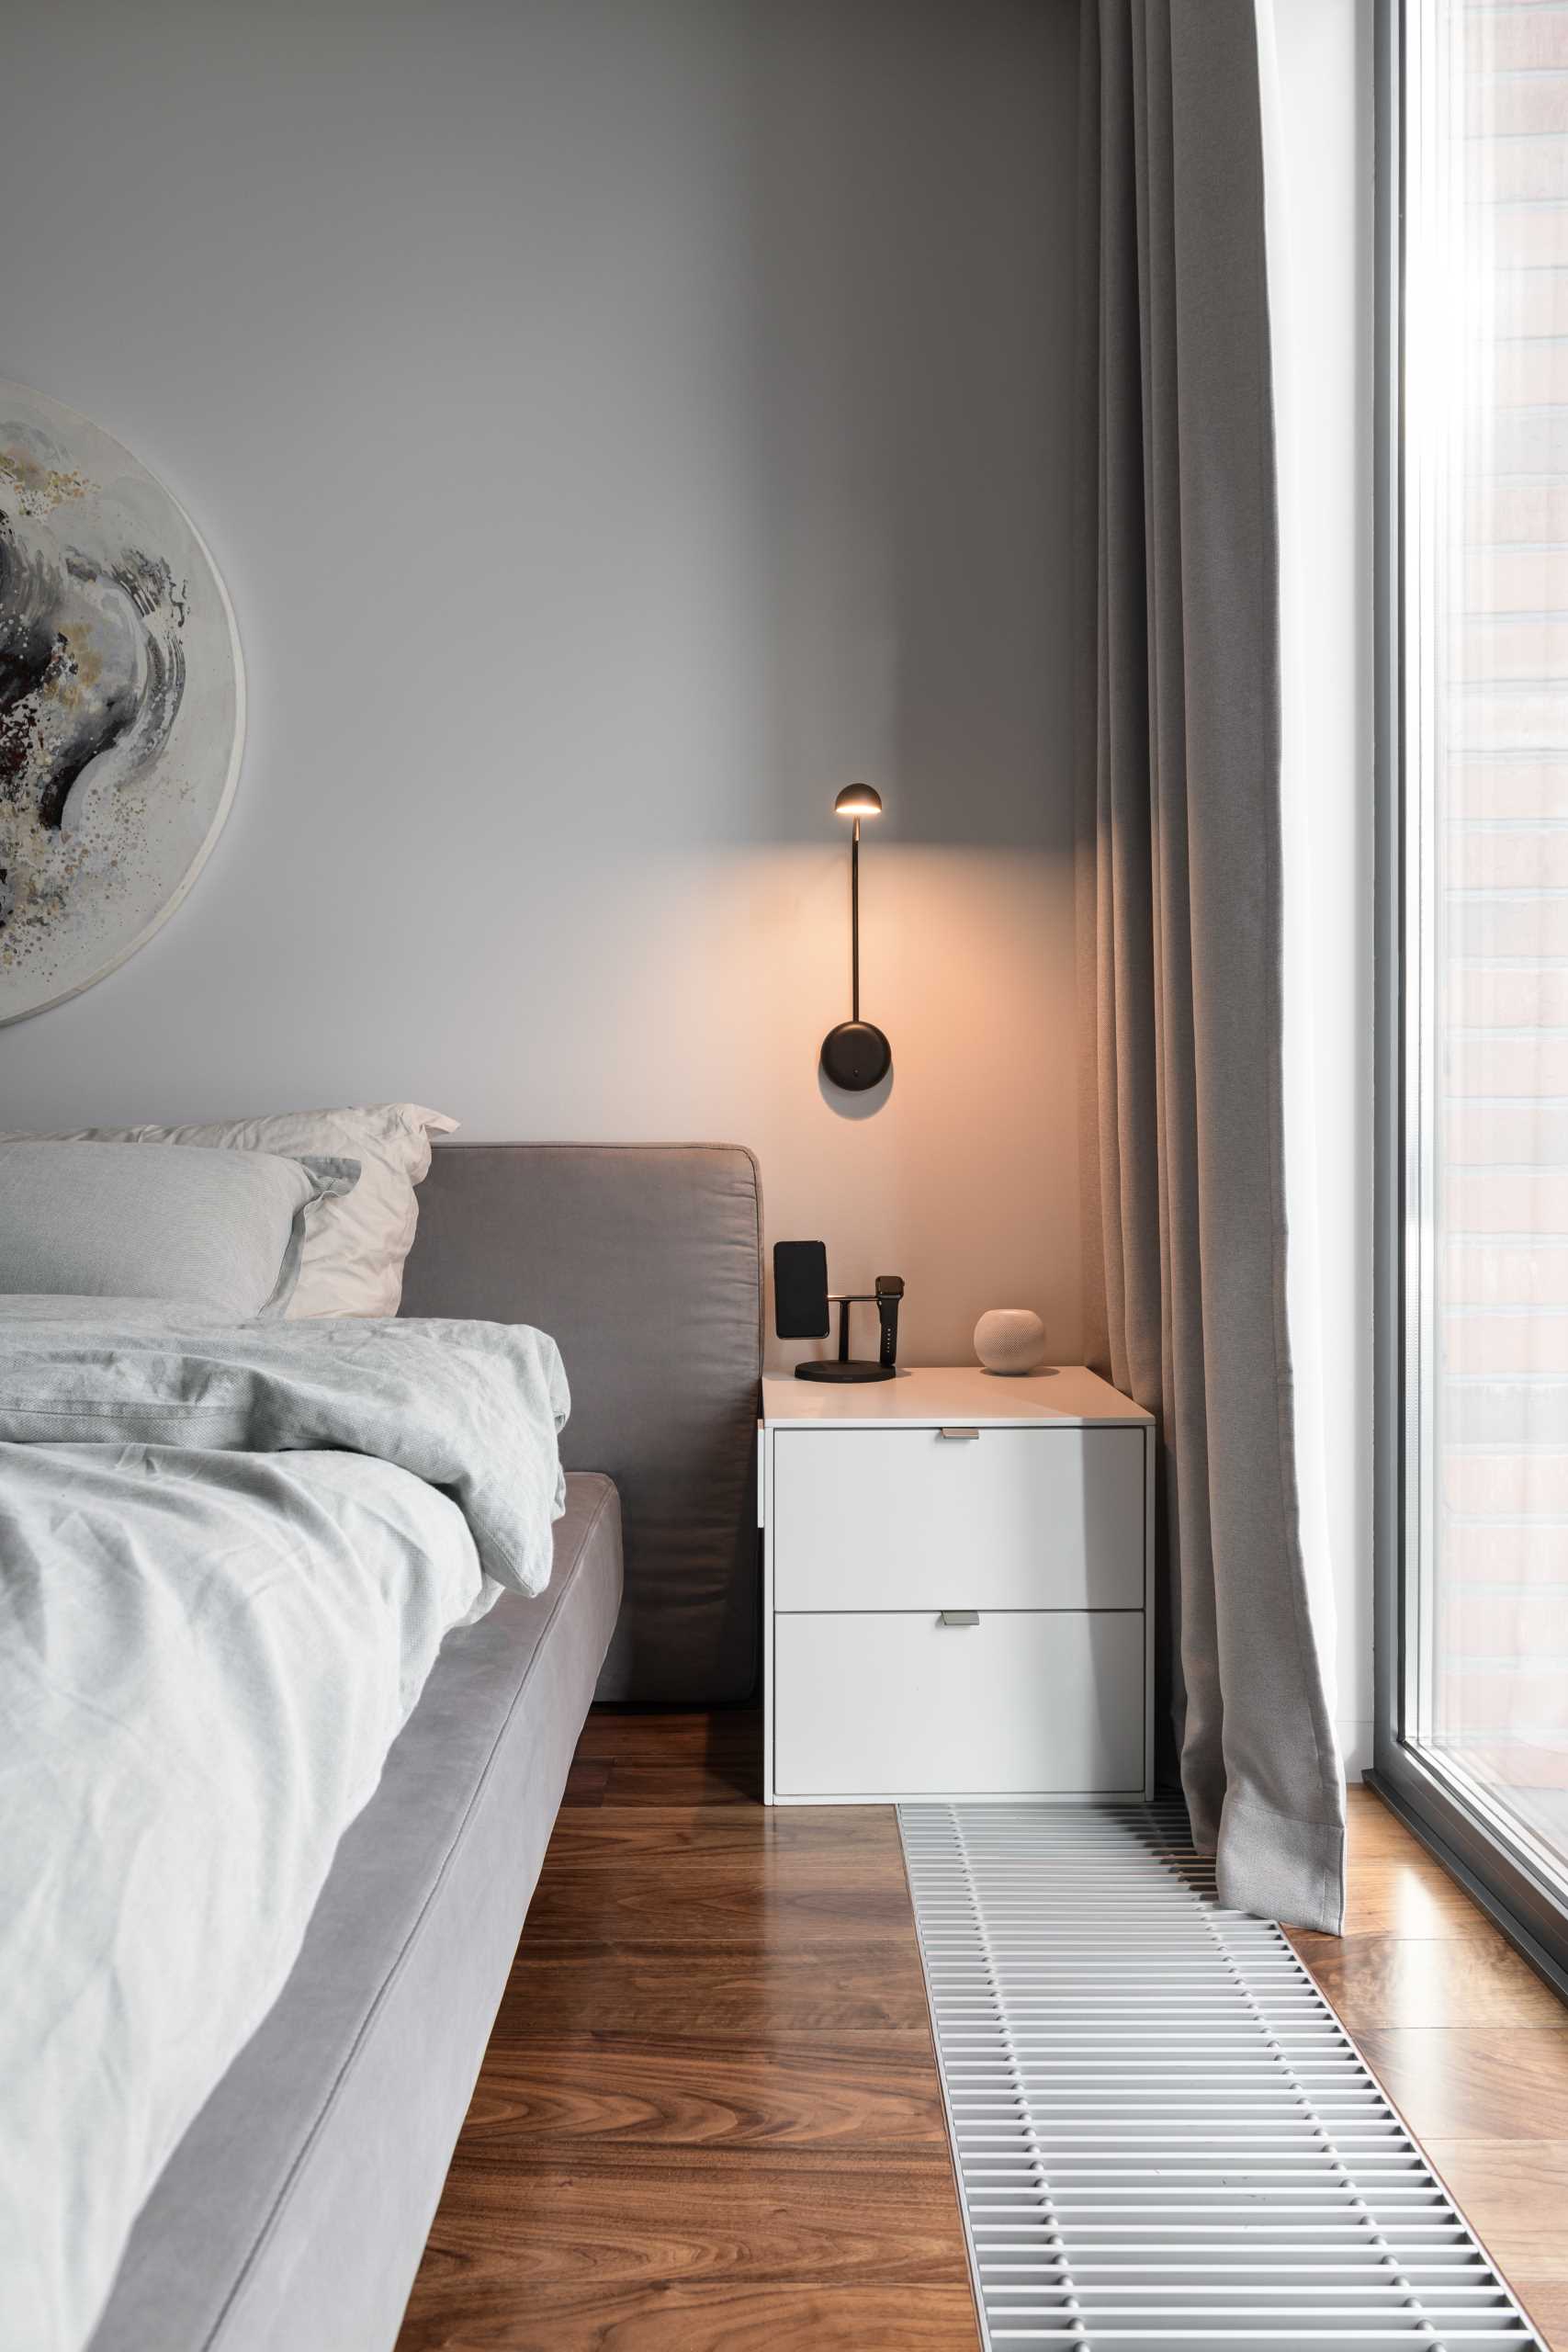 A modern bedroom with a wall-mounted light above the bedside table.